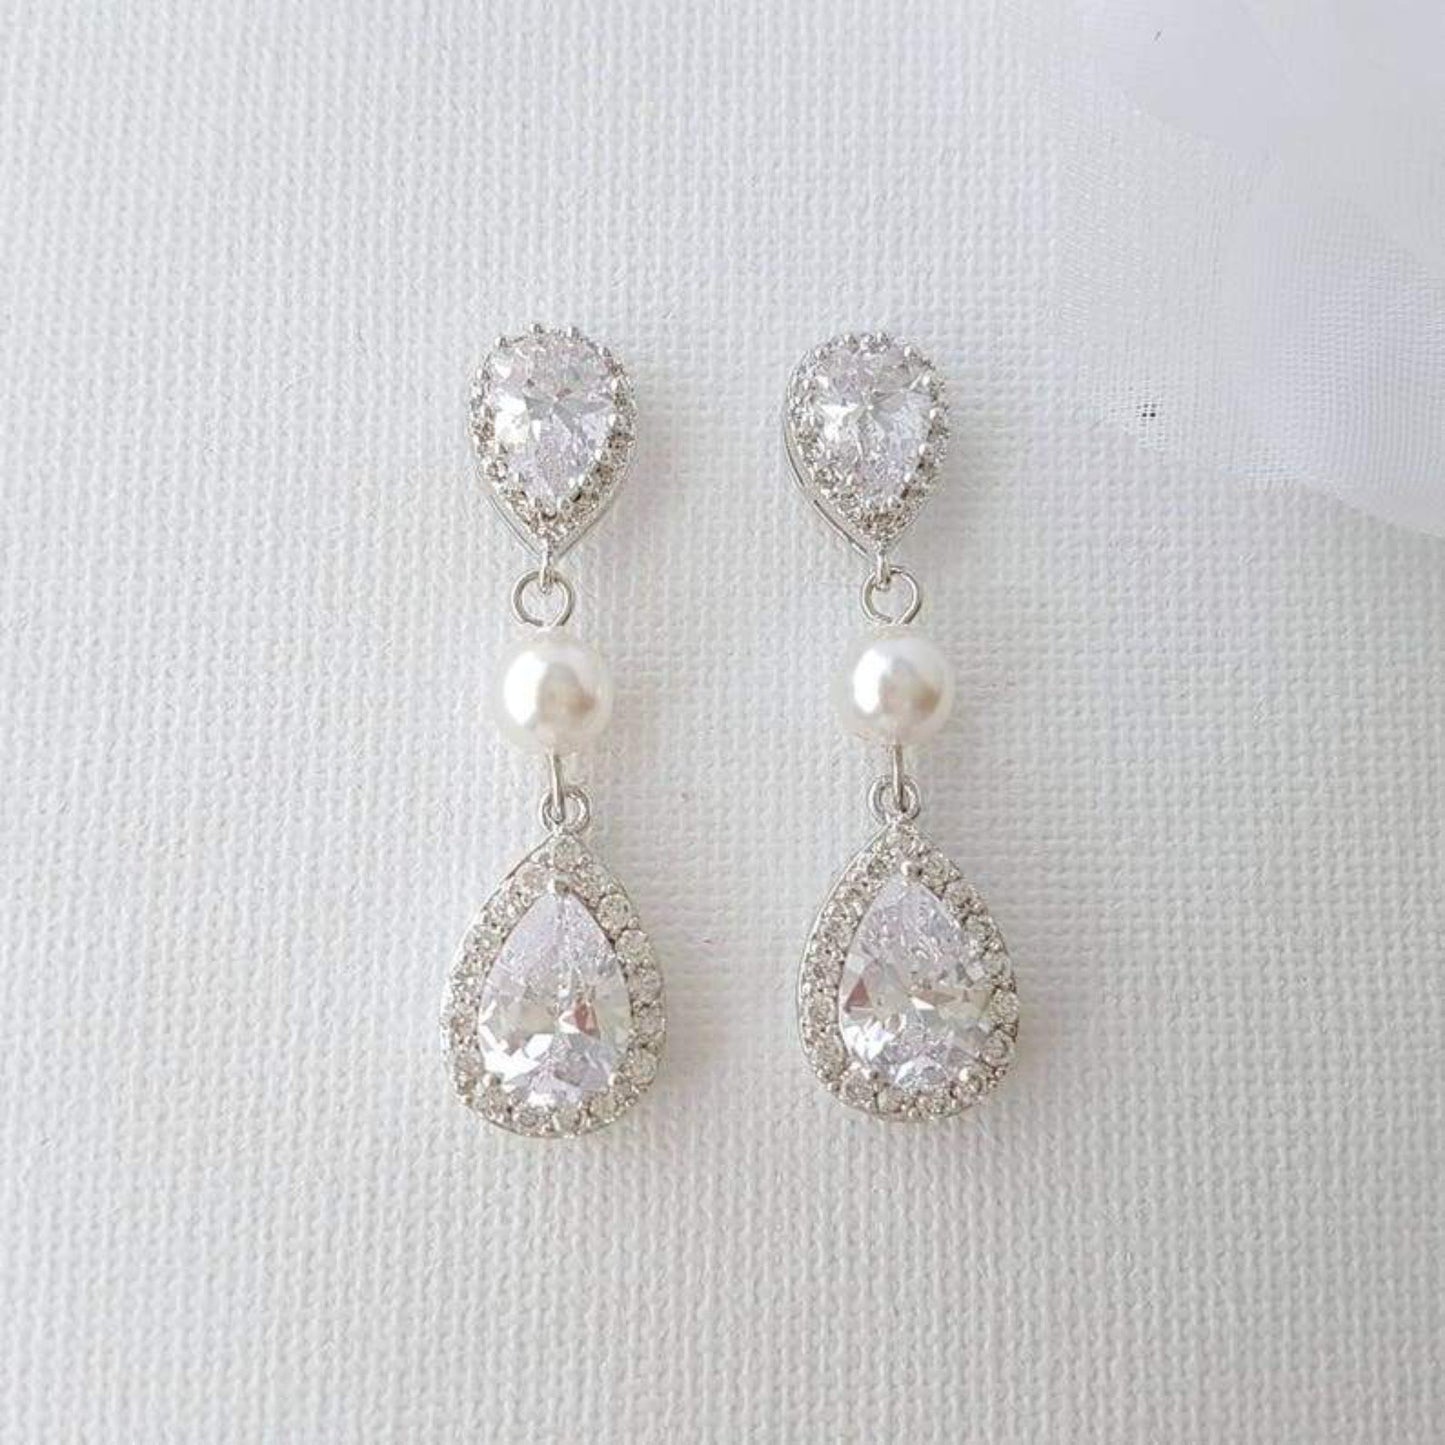 Small Pearl and Crystal Earring Necklace Set- Emma